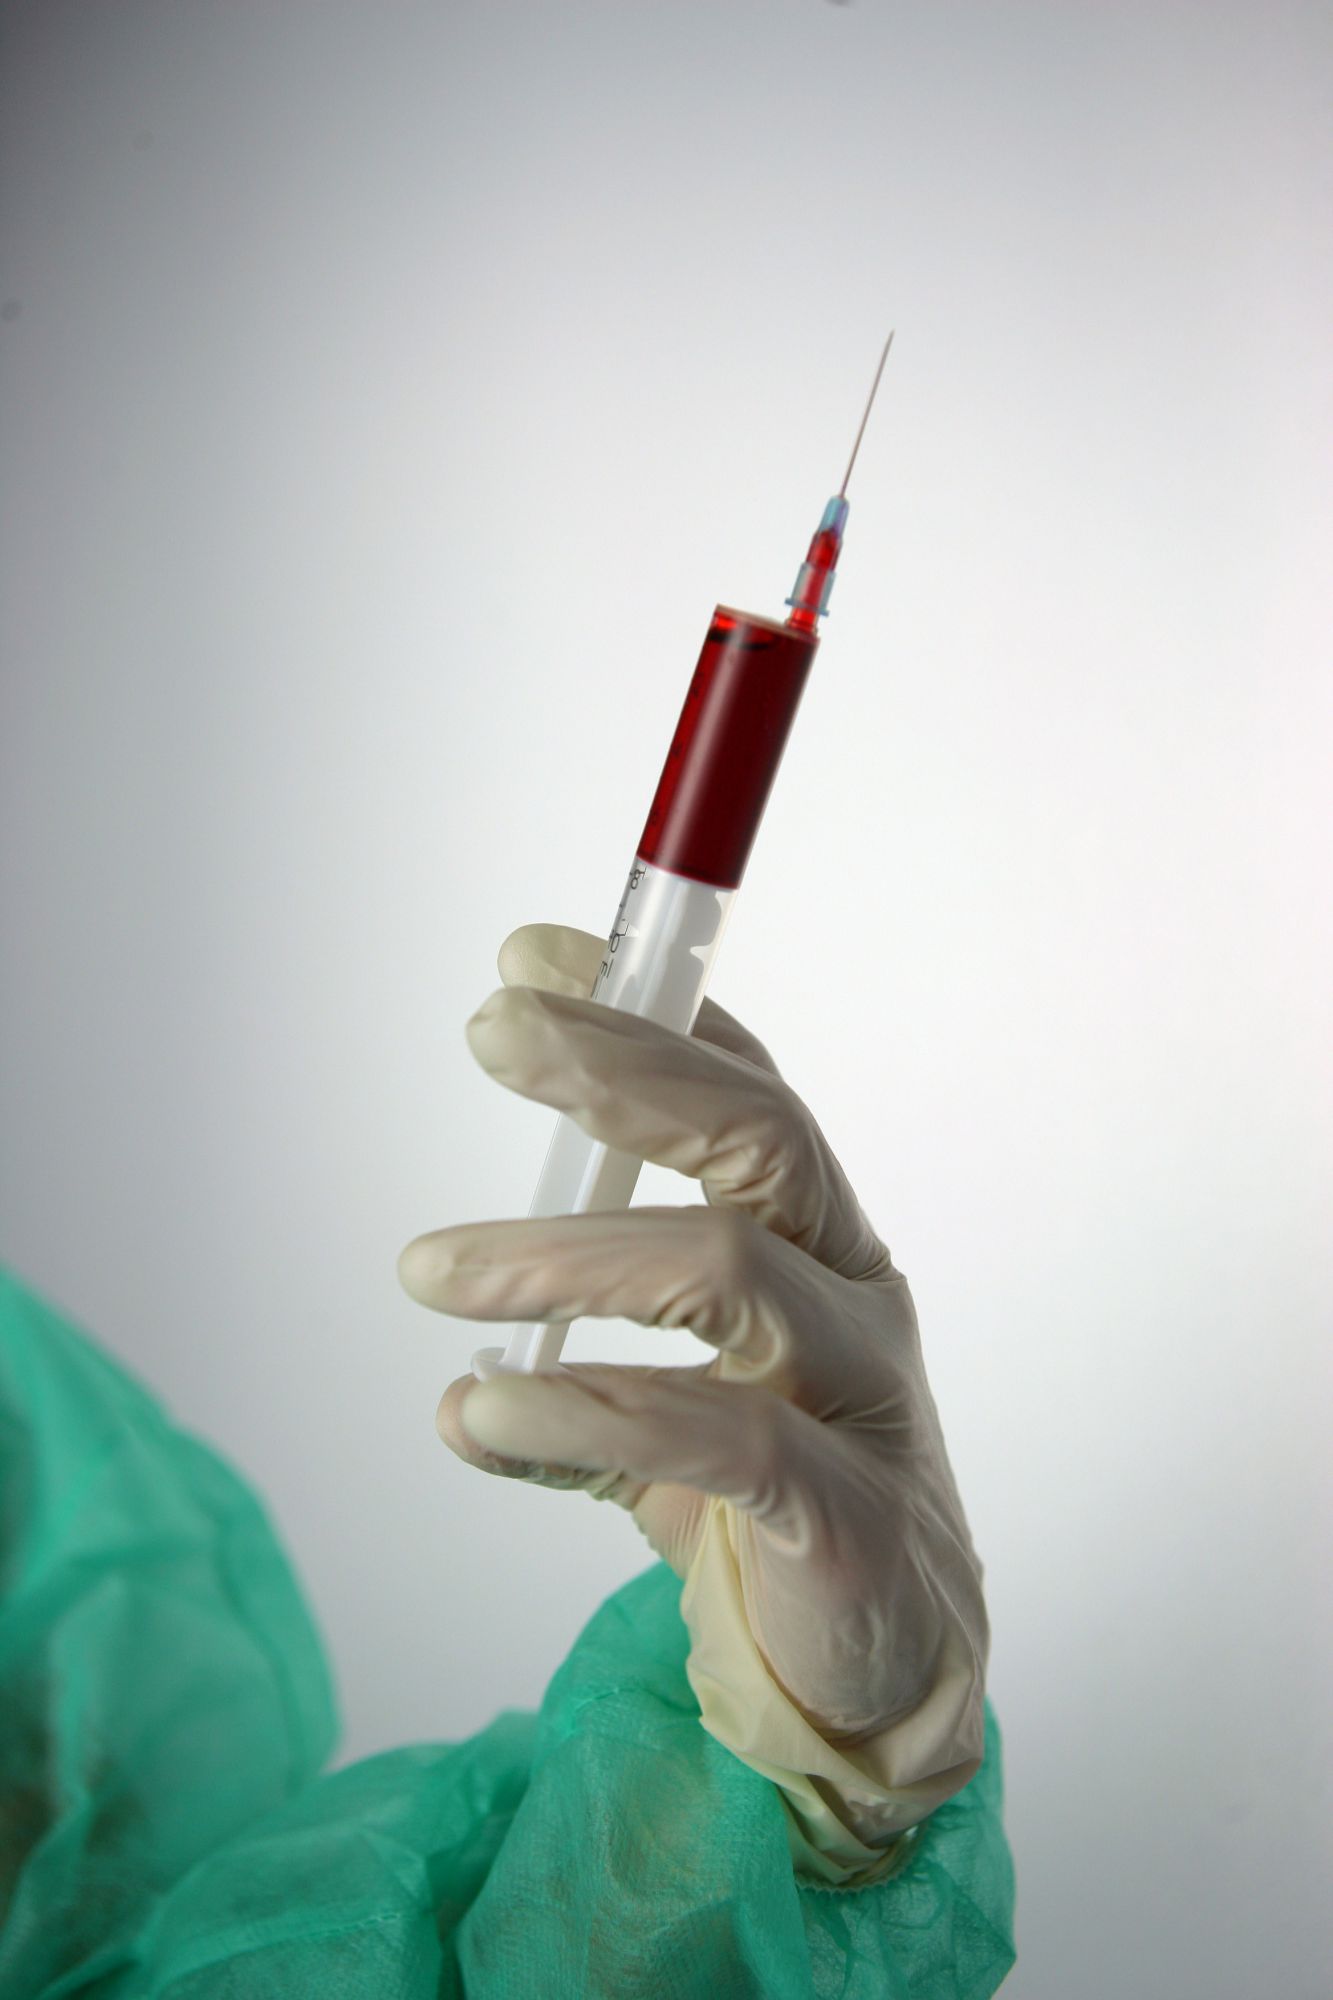 The low molecular weight heparins are injectable anticoagulants. © Phovoir